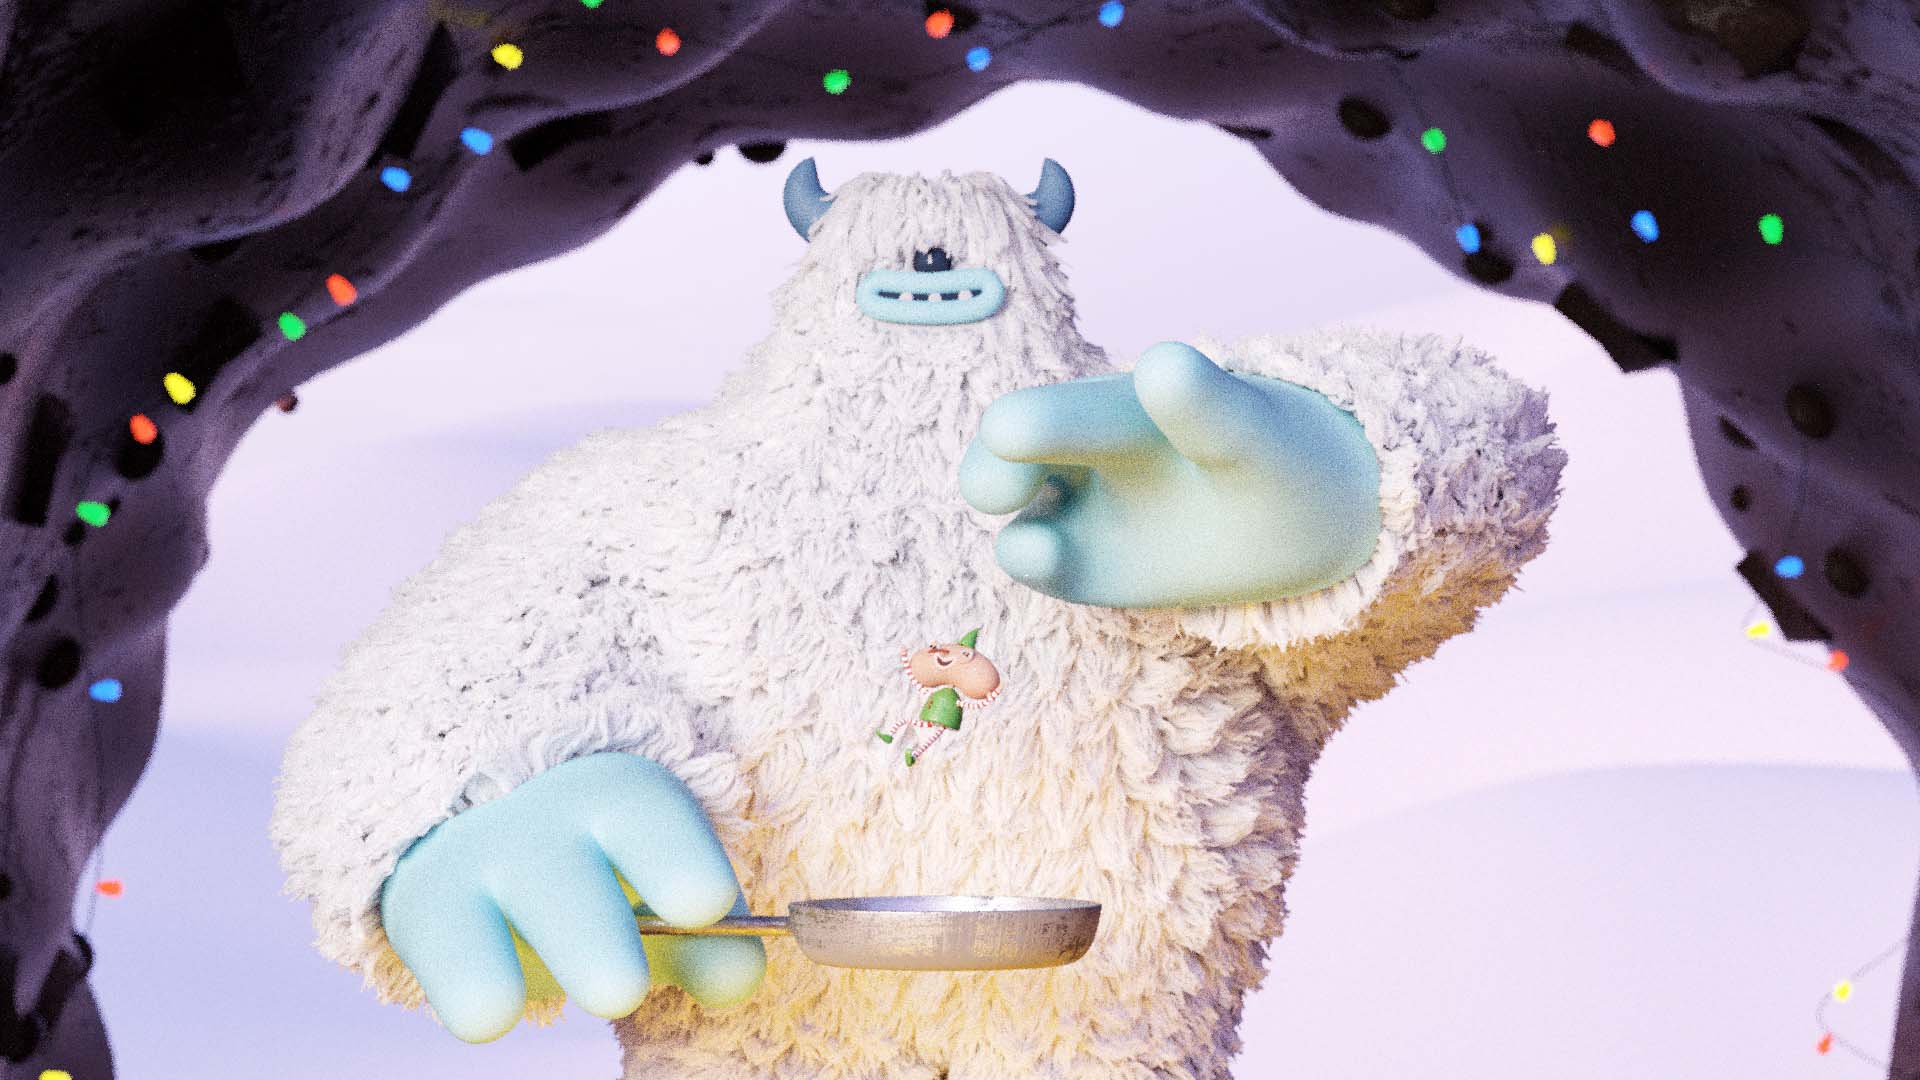 design-motion-3d-photography-octane-redshift-art-visual-animation-render-style-graphic-digital-federicopicci-characterdesign-character-stopmotion-3ddesign-mood-rig-model-cinema4d-illustration-yeti-christmas-dinner-elf-cooking-furry-cave-monster-cute